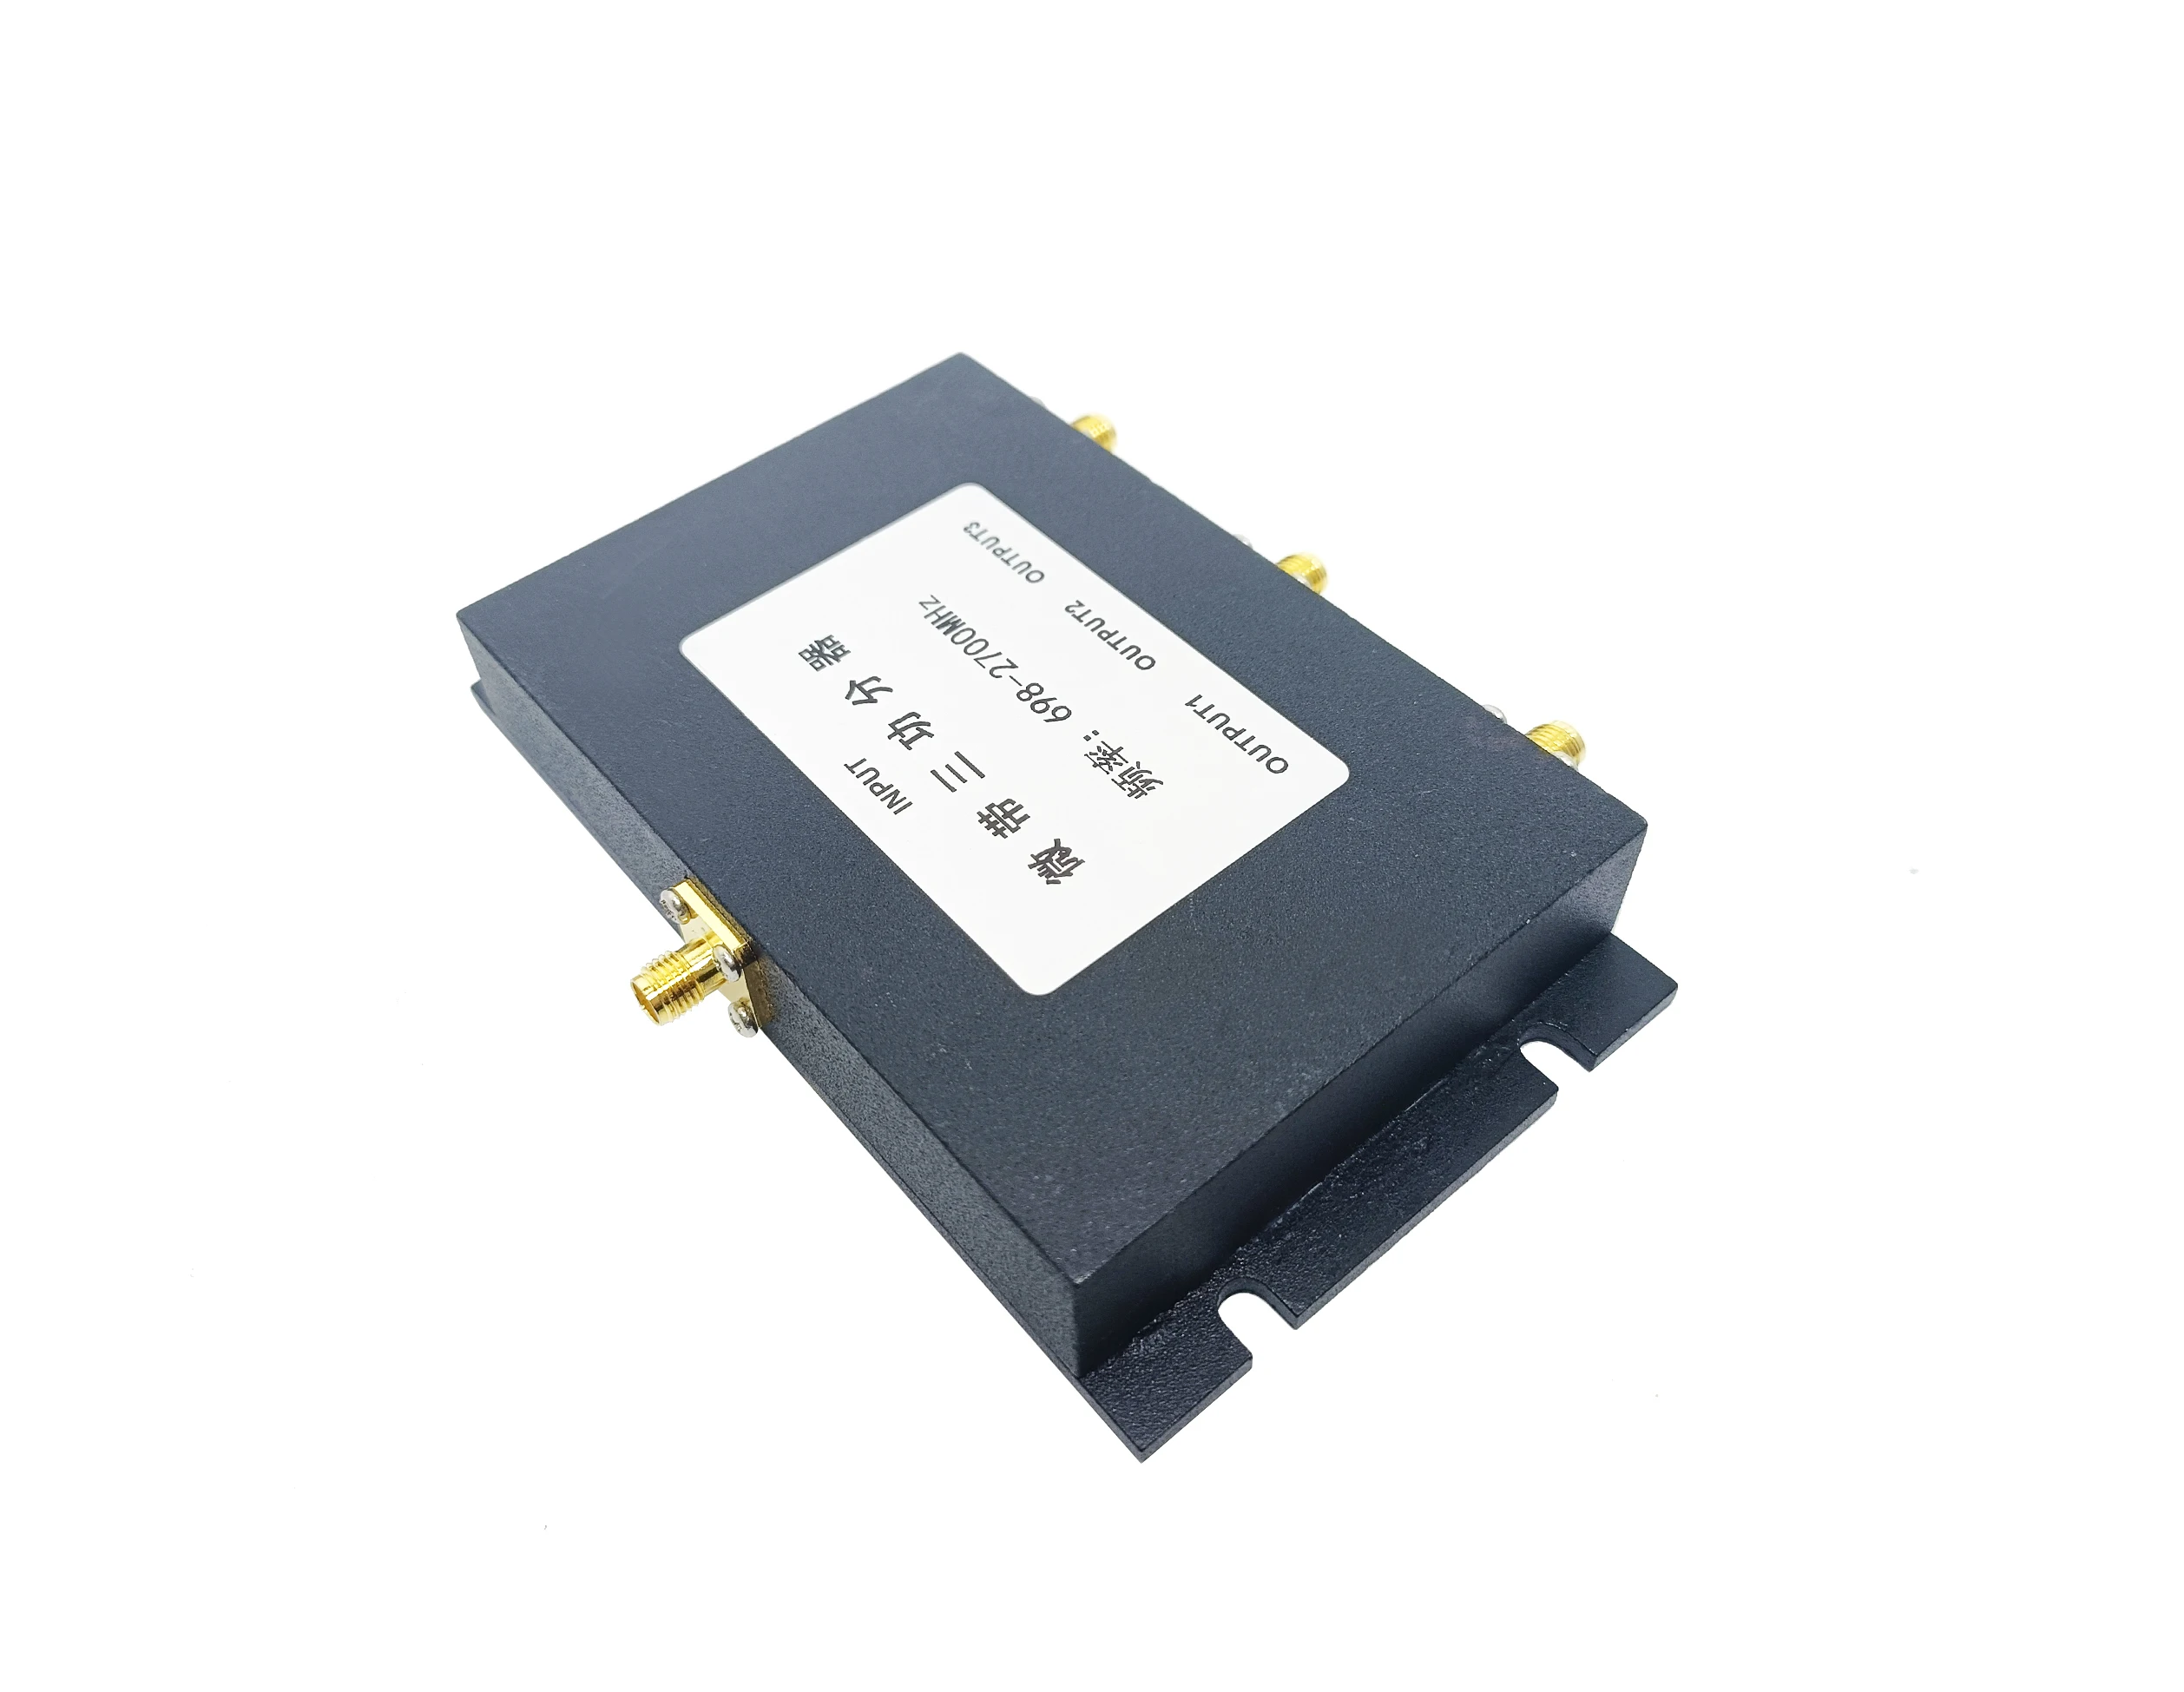 698-2700MHz Communication 3 Way Power Splitter 50W 50ohm SMA Female 3 Way Power Divider manufacture